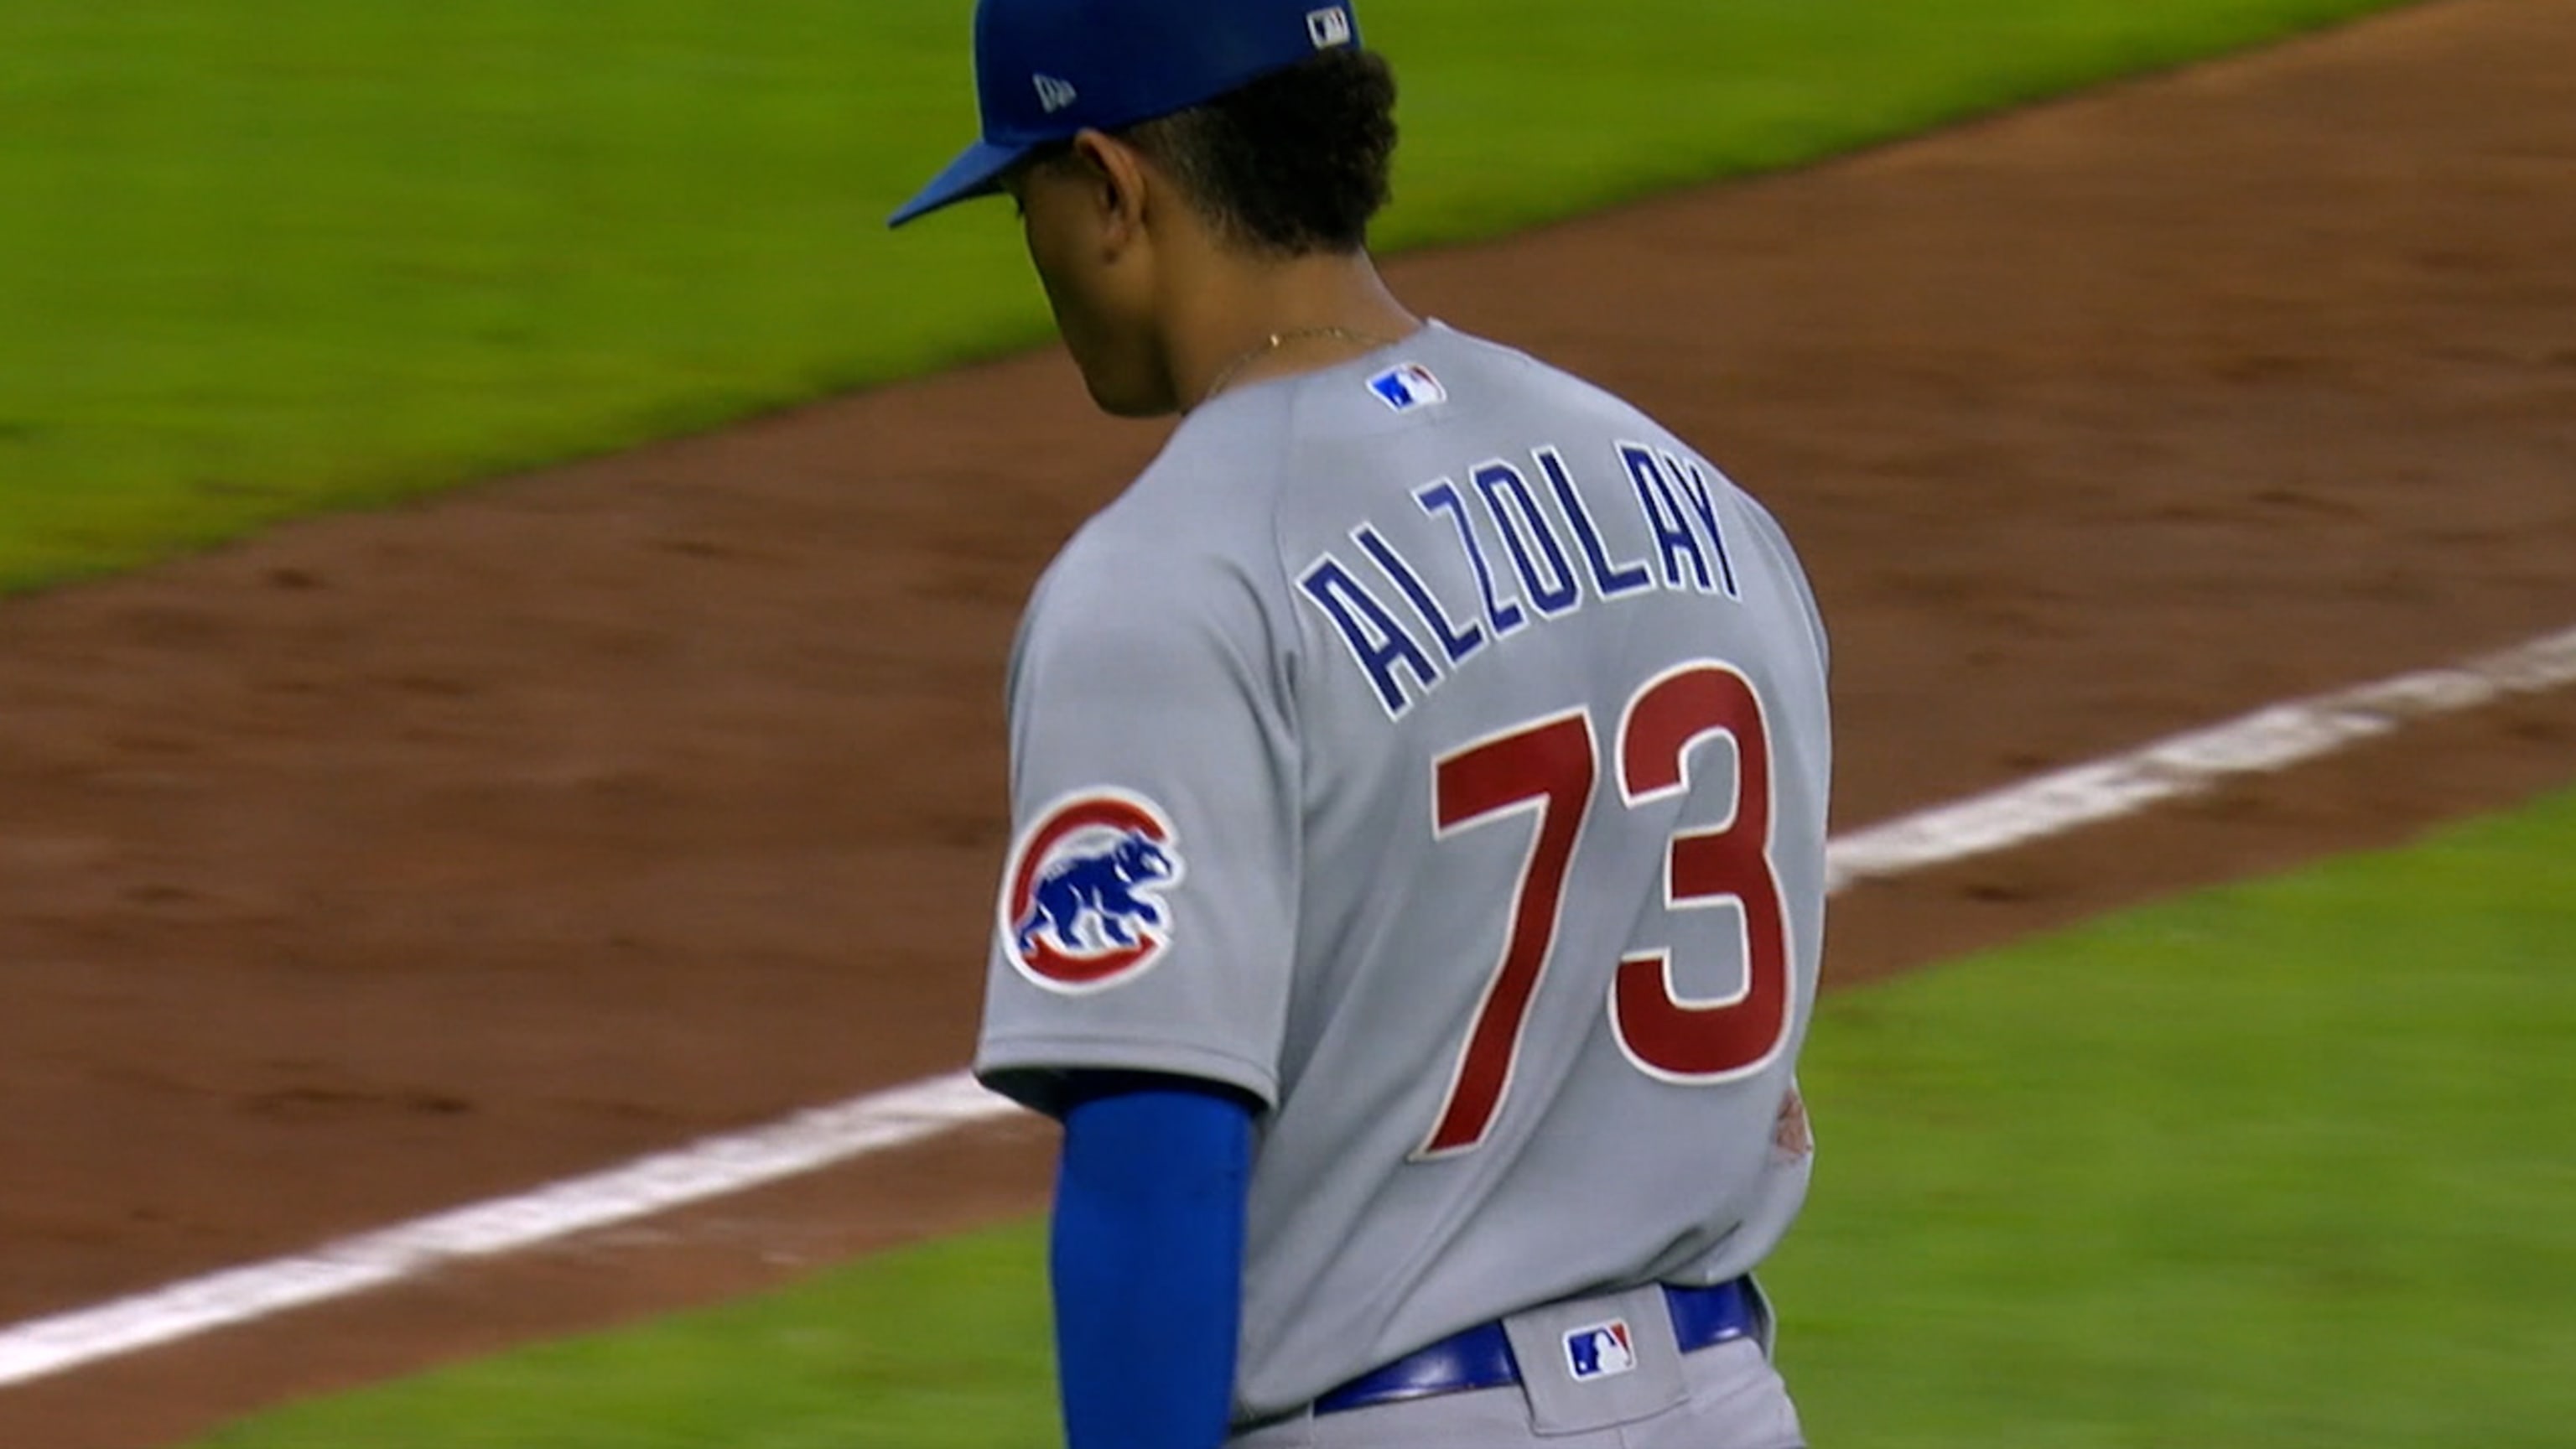 Adbert Alzolay, Cubs win finale against Braves